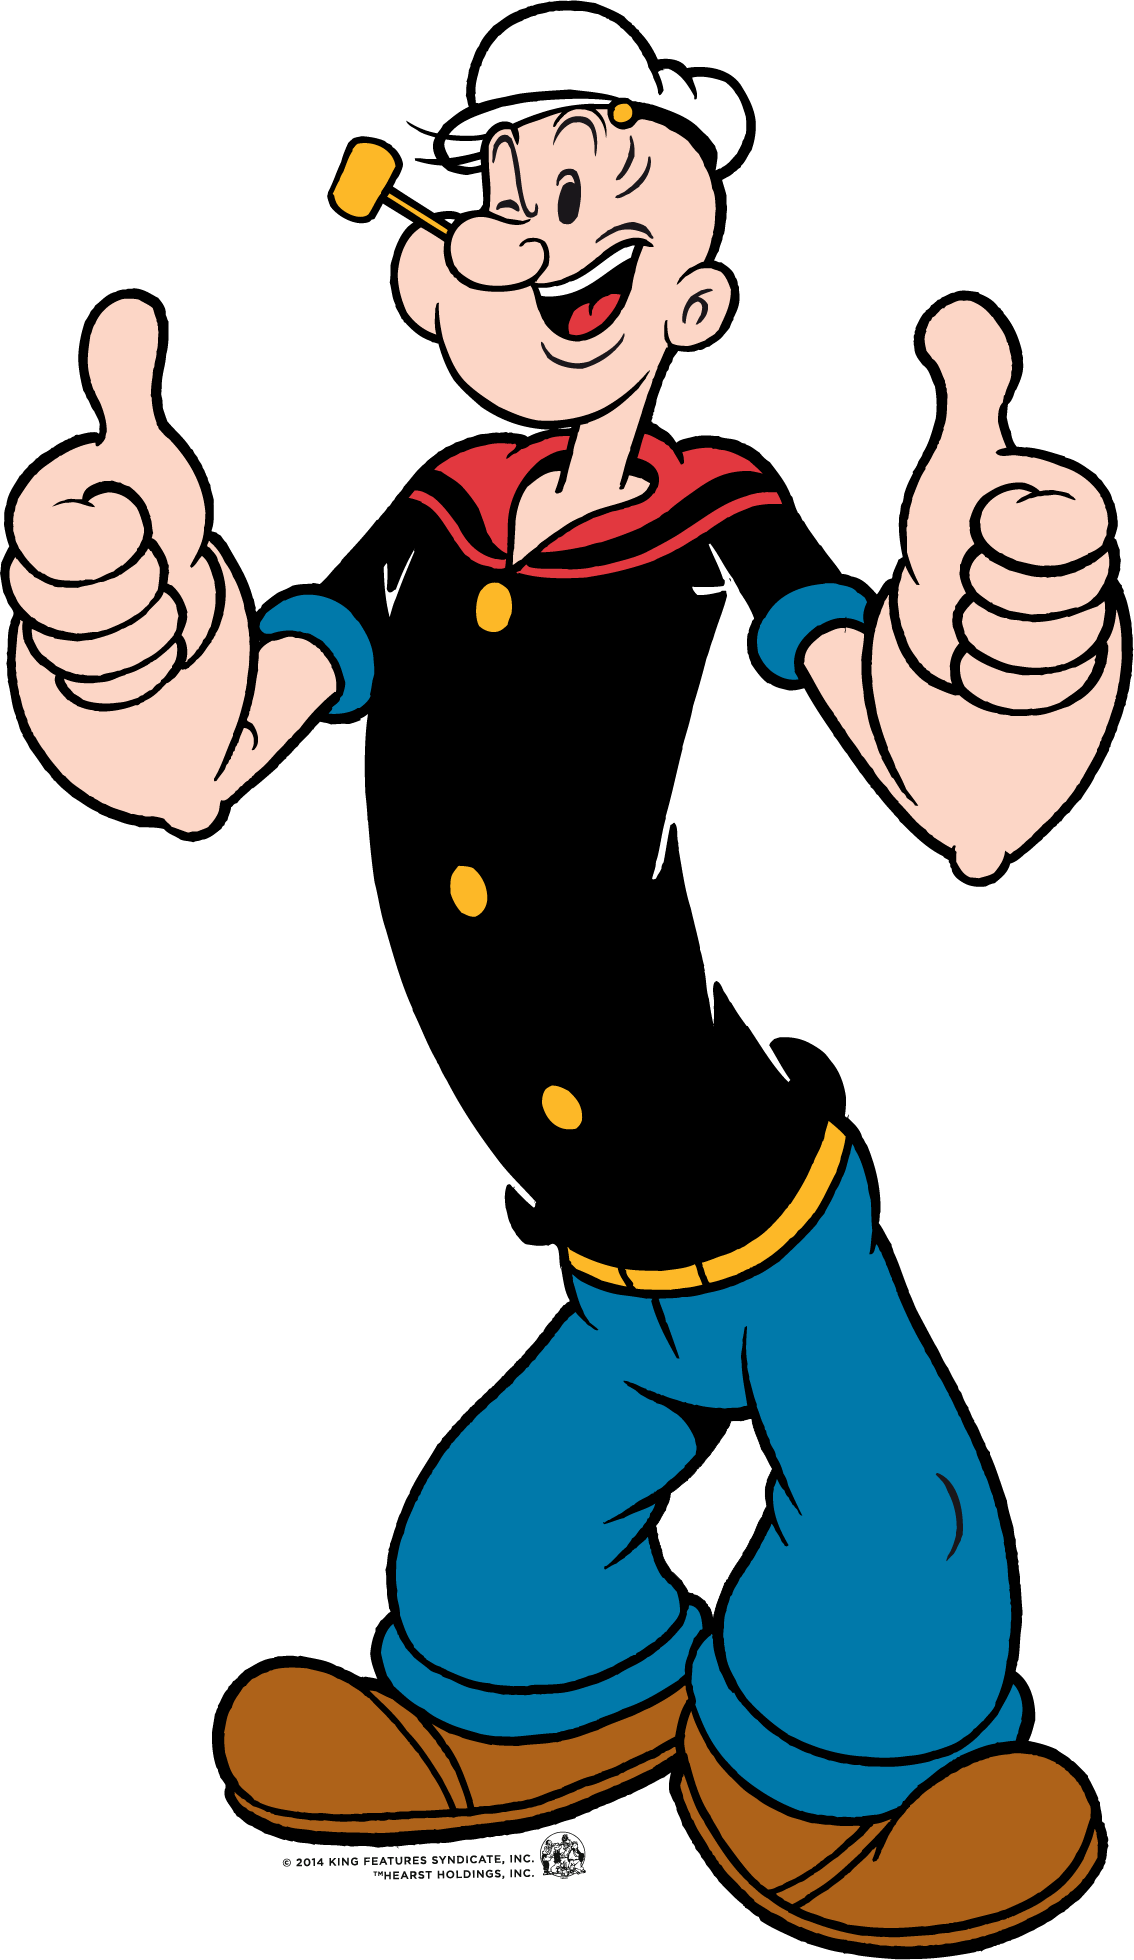 Popeye The Sailor Transparent Images PNG